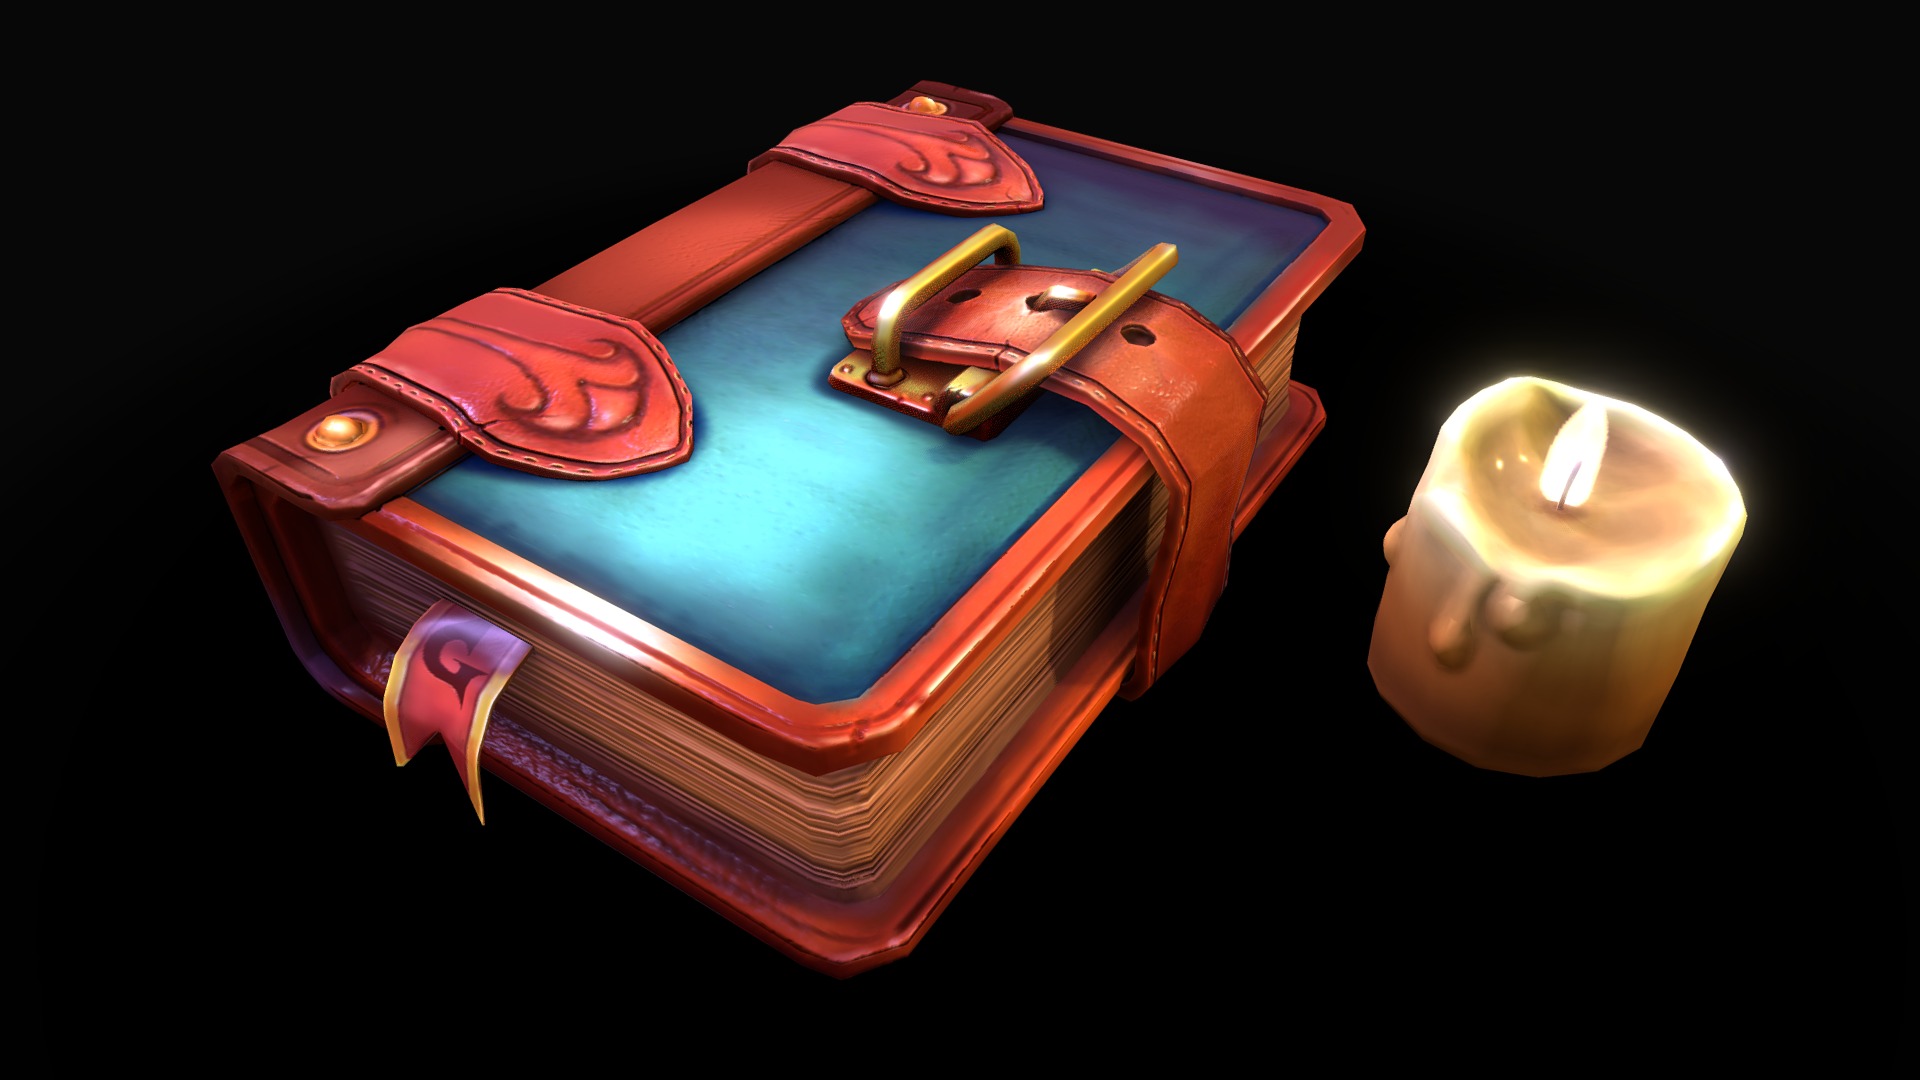 3D model Old Leather Book  (ZBrush Test 02) - This is a 3D model of the Old Leather Book  (ZBrush Test 02). The 3D model is about a red and blue purse with a candle in it.